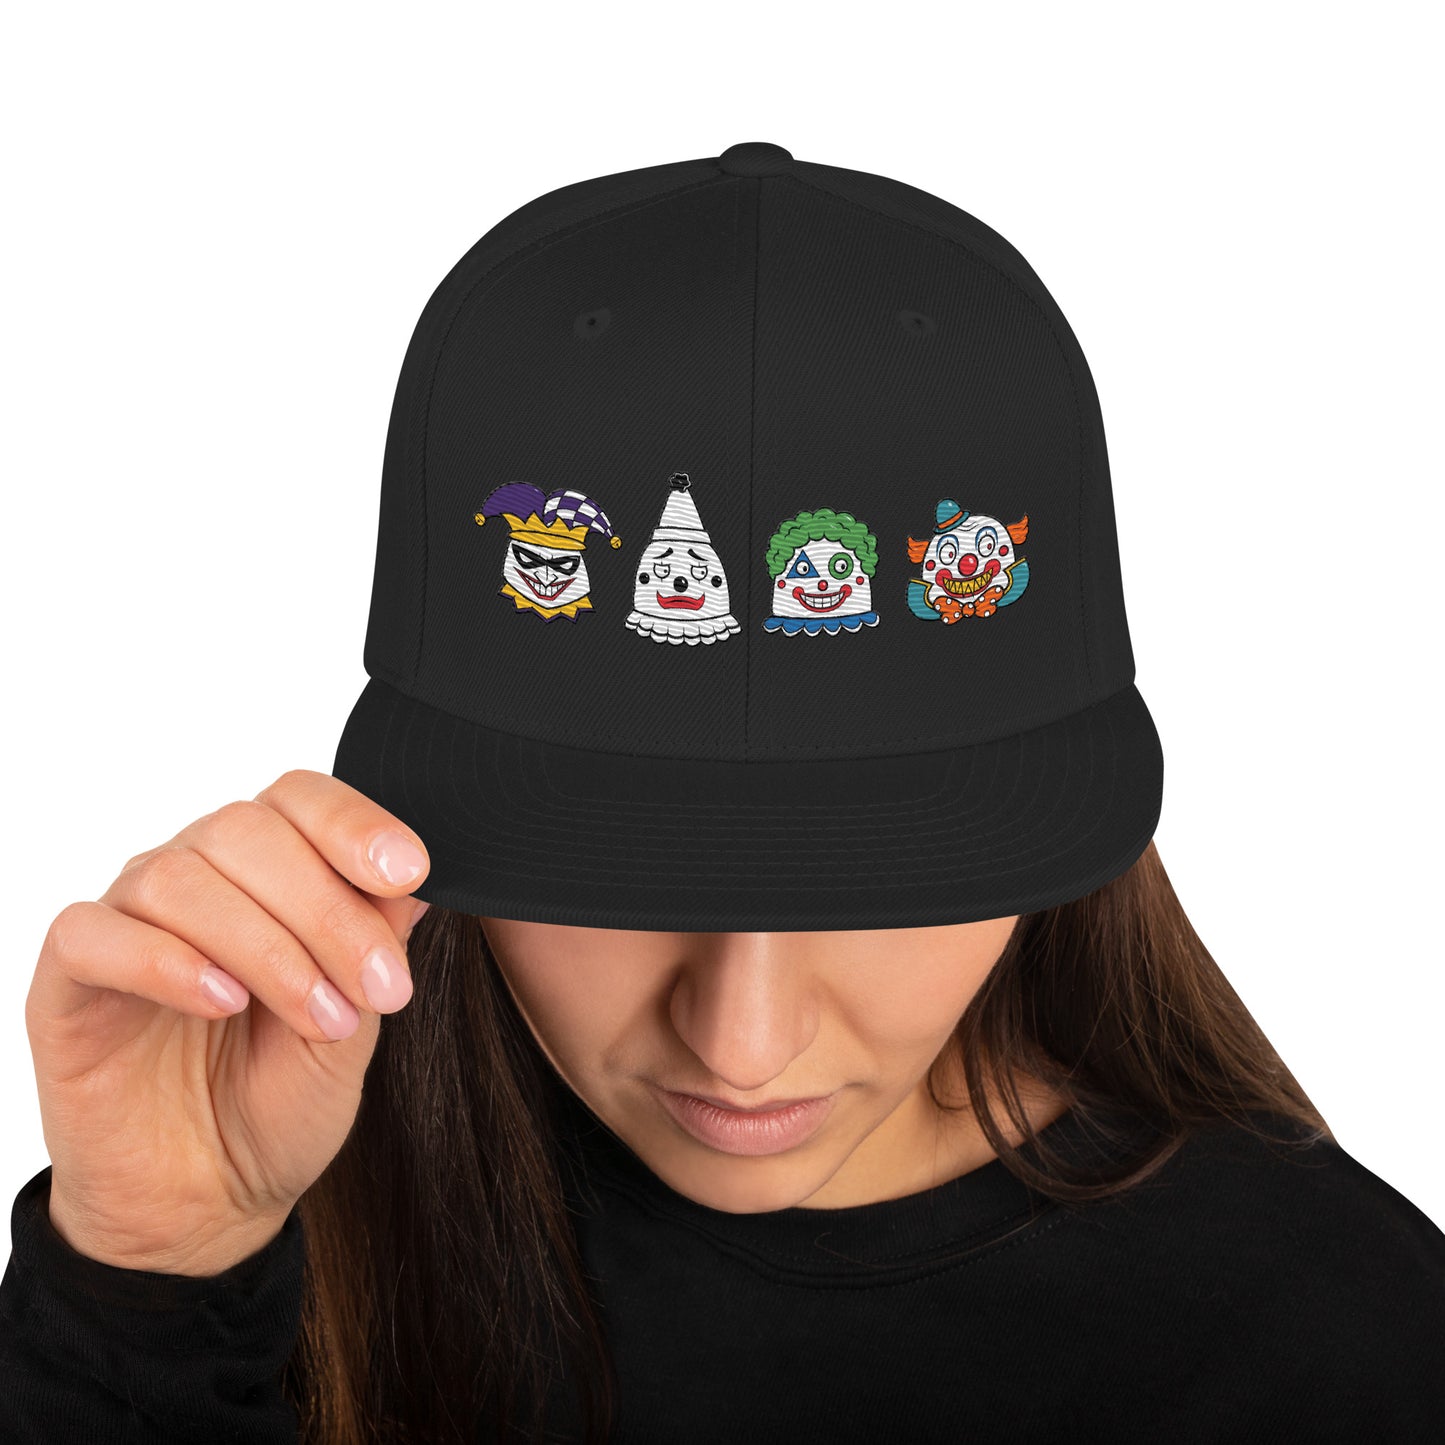 Send in the Clowns - Snapback Hat